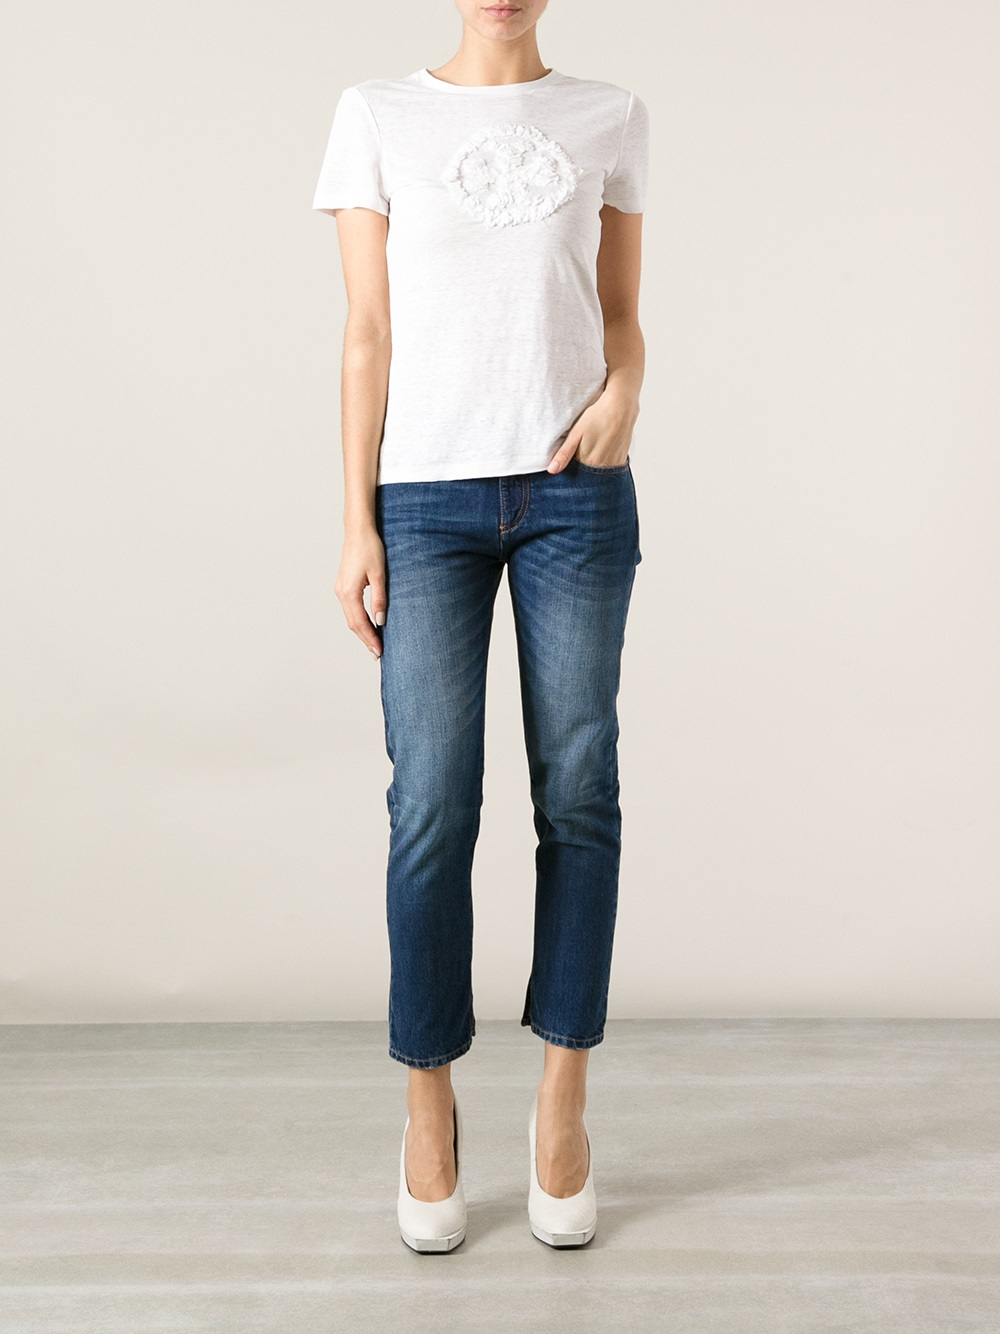 Lyst - Tory Burch Textured Logo T-shirt in White